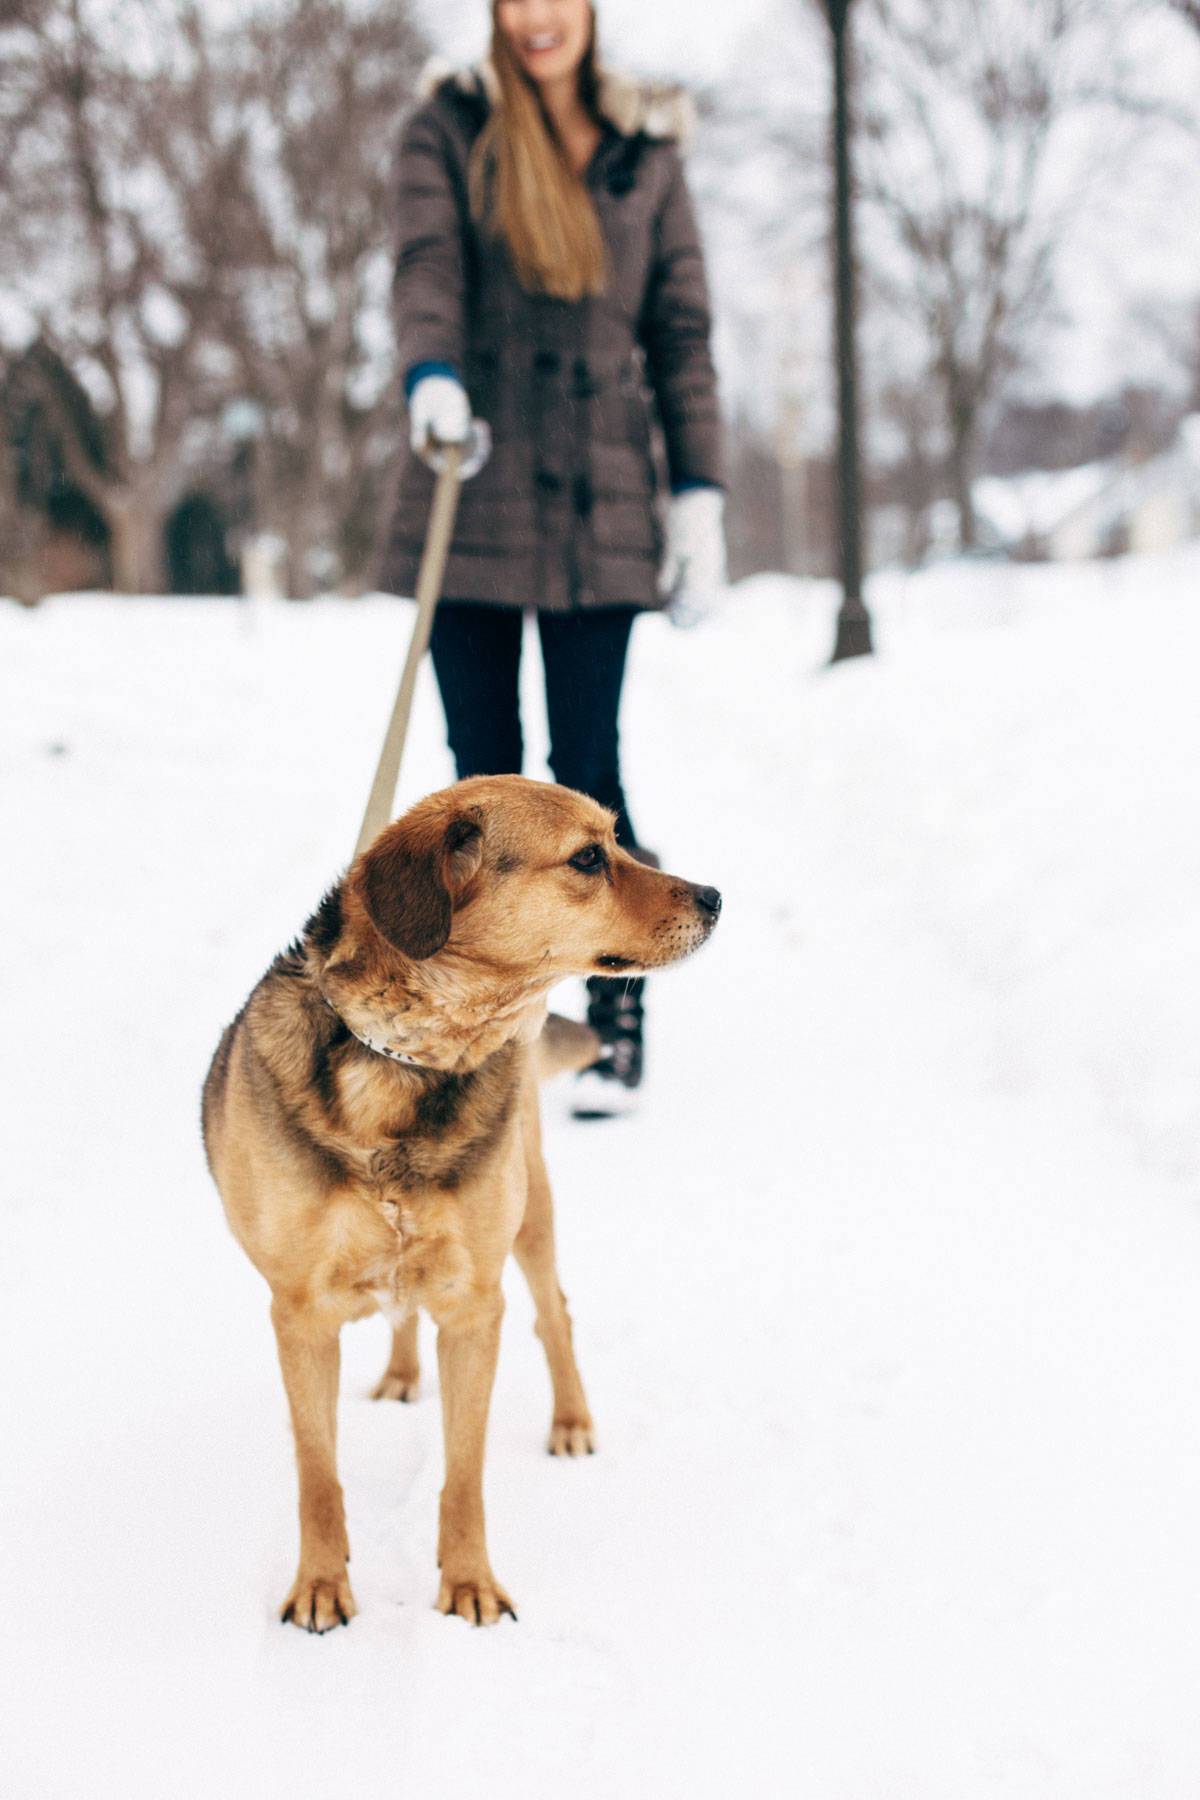 Woman with dog on leash in the snow.